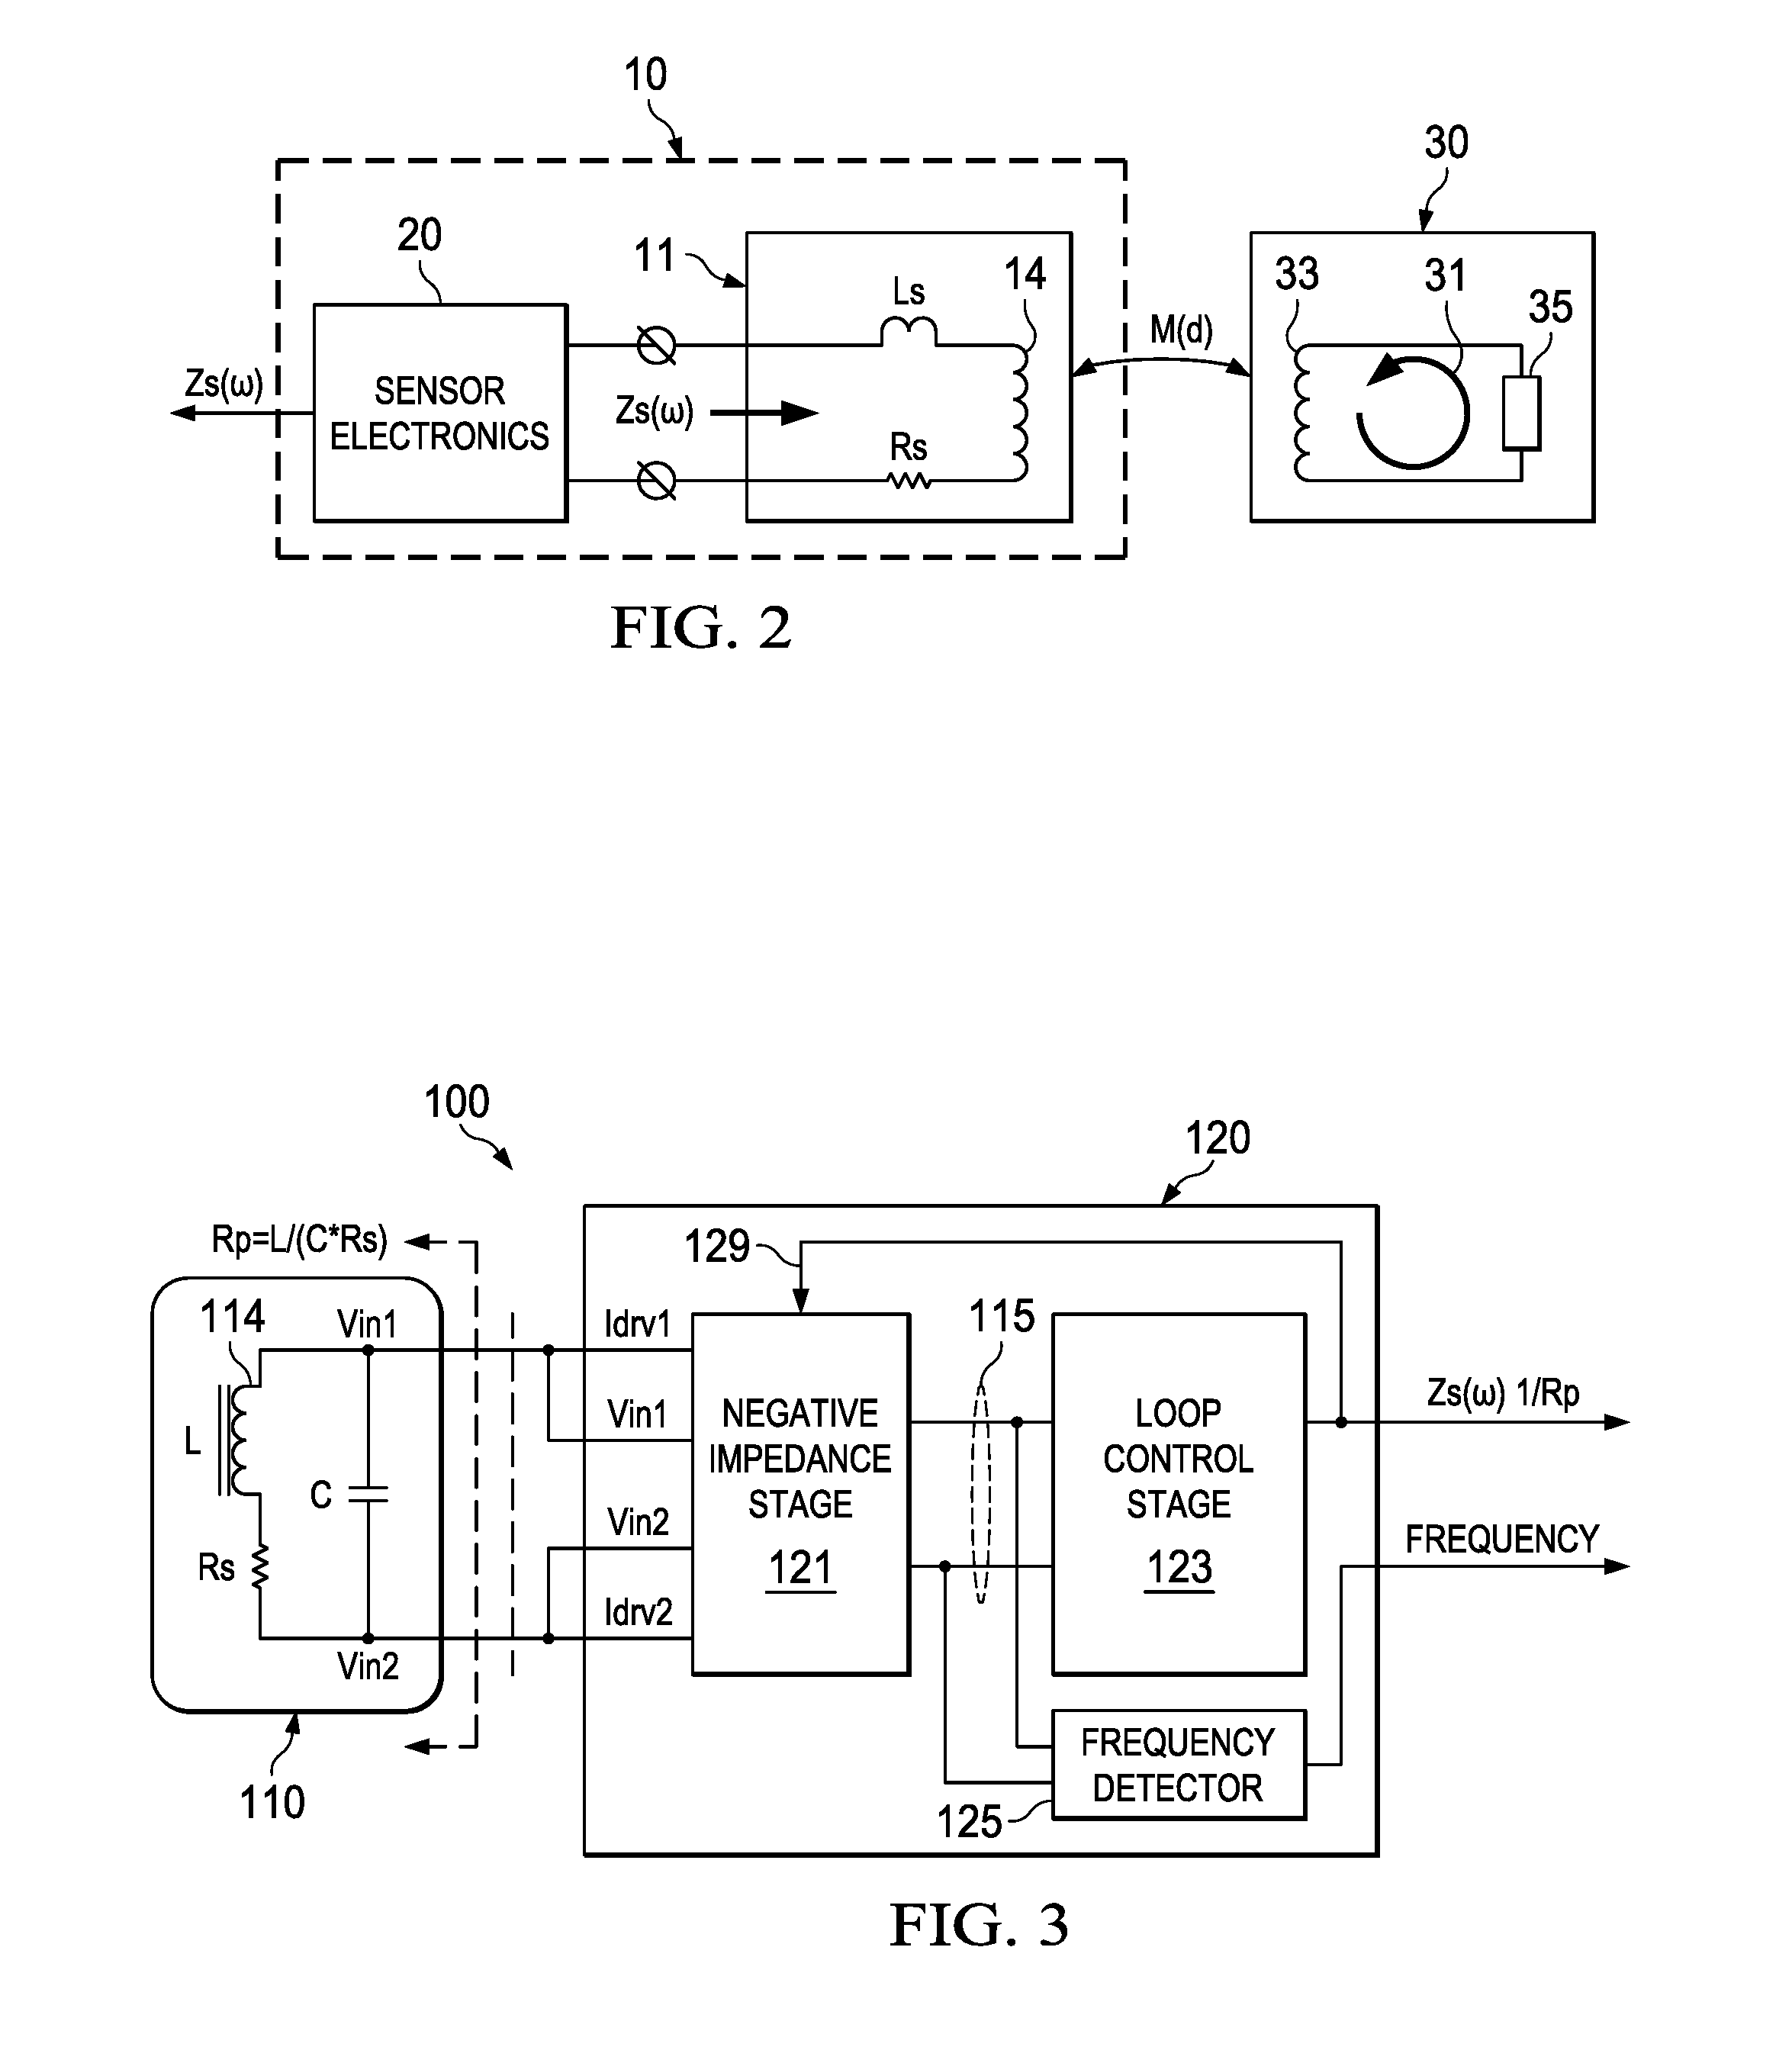 Spectrographic material analysis using multi-frequency inductive sensing